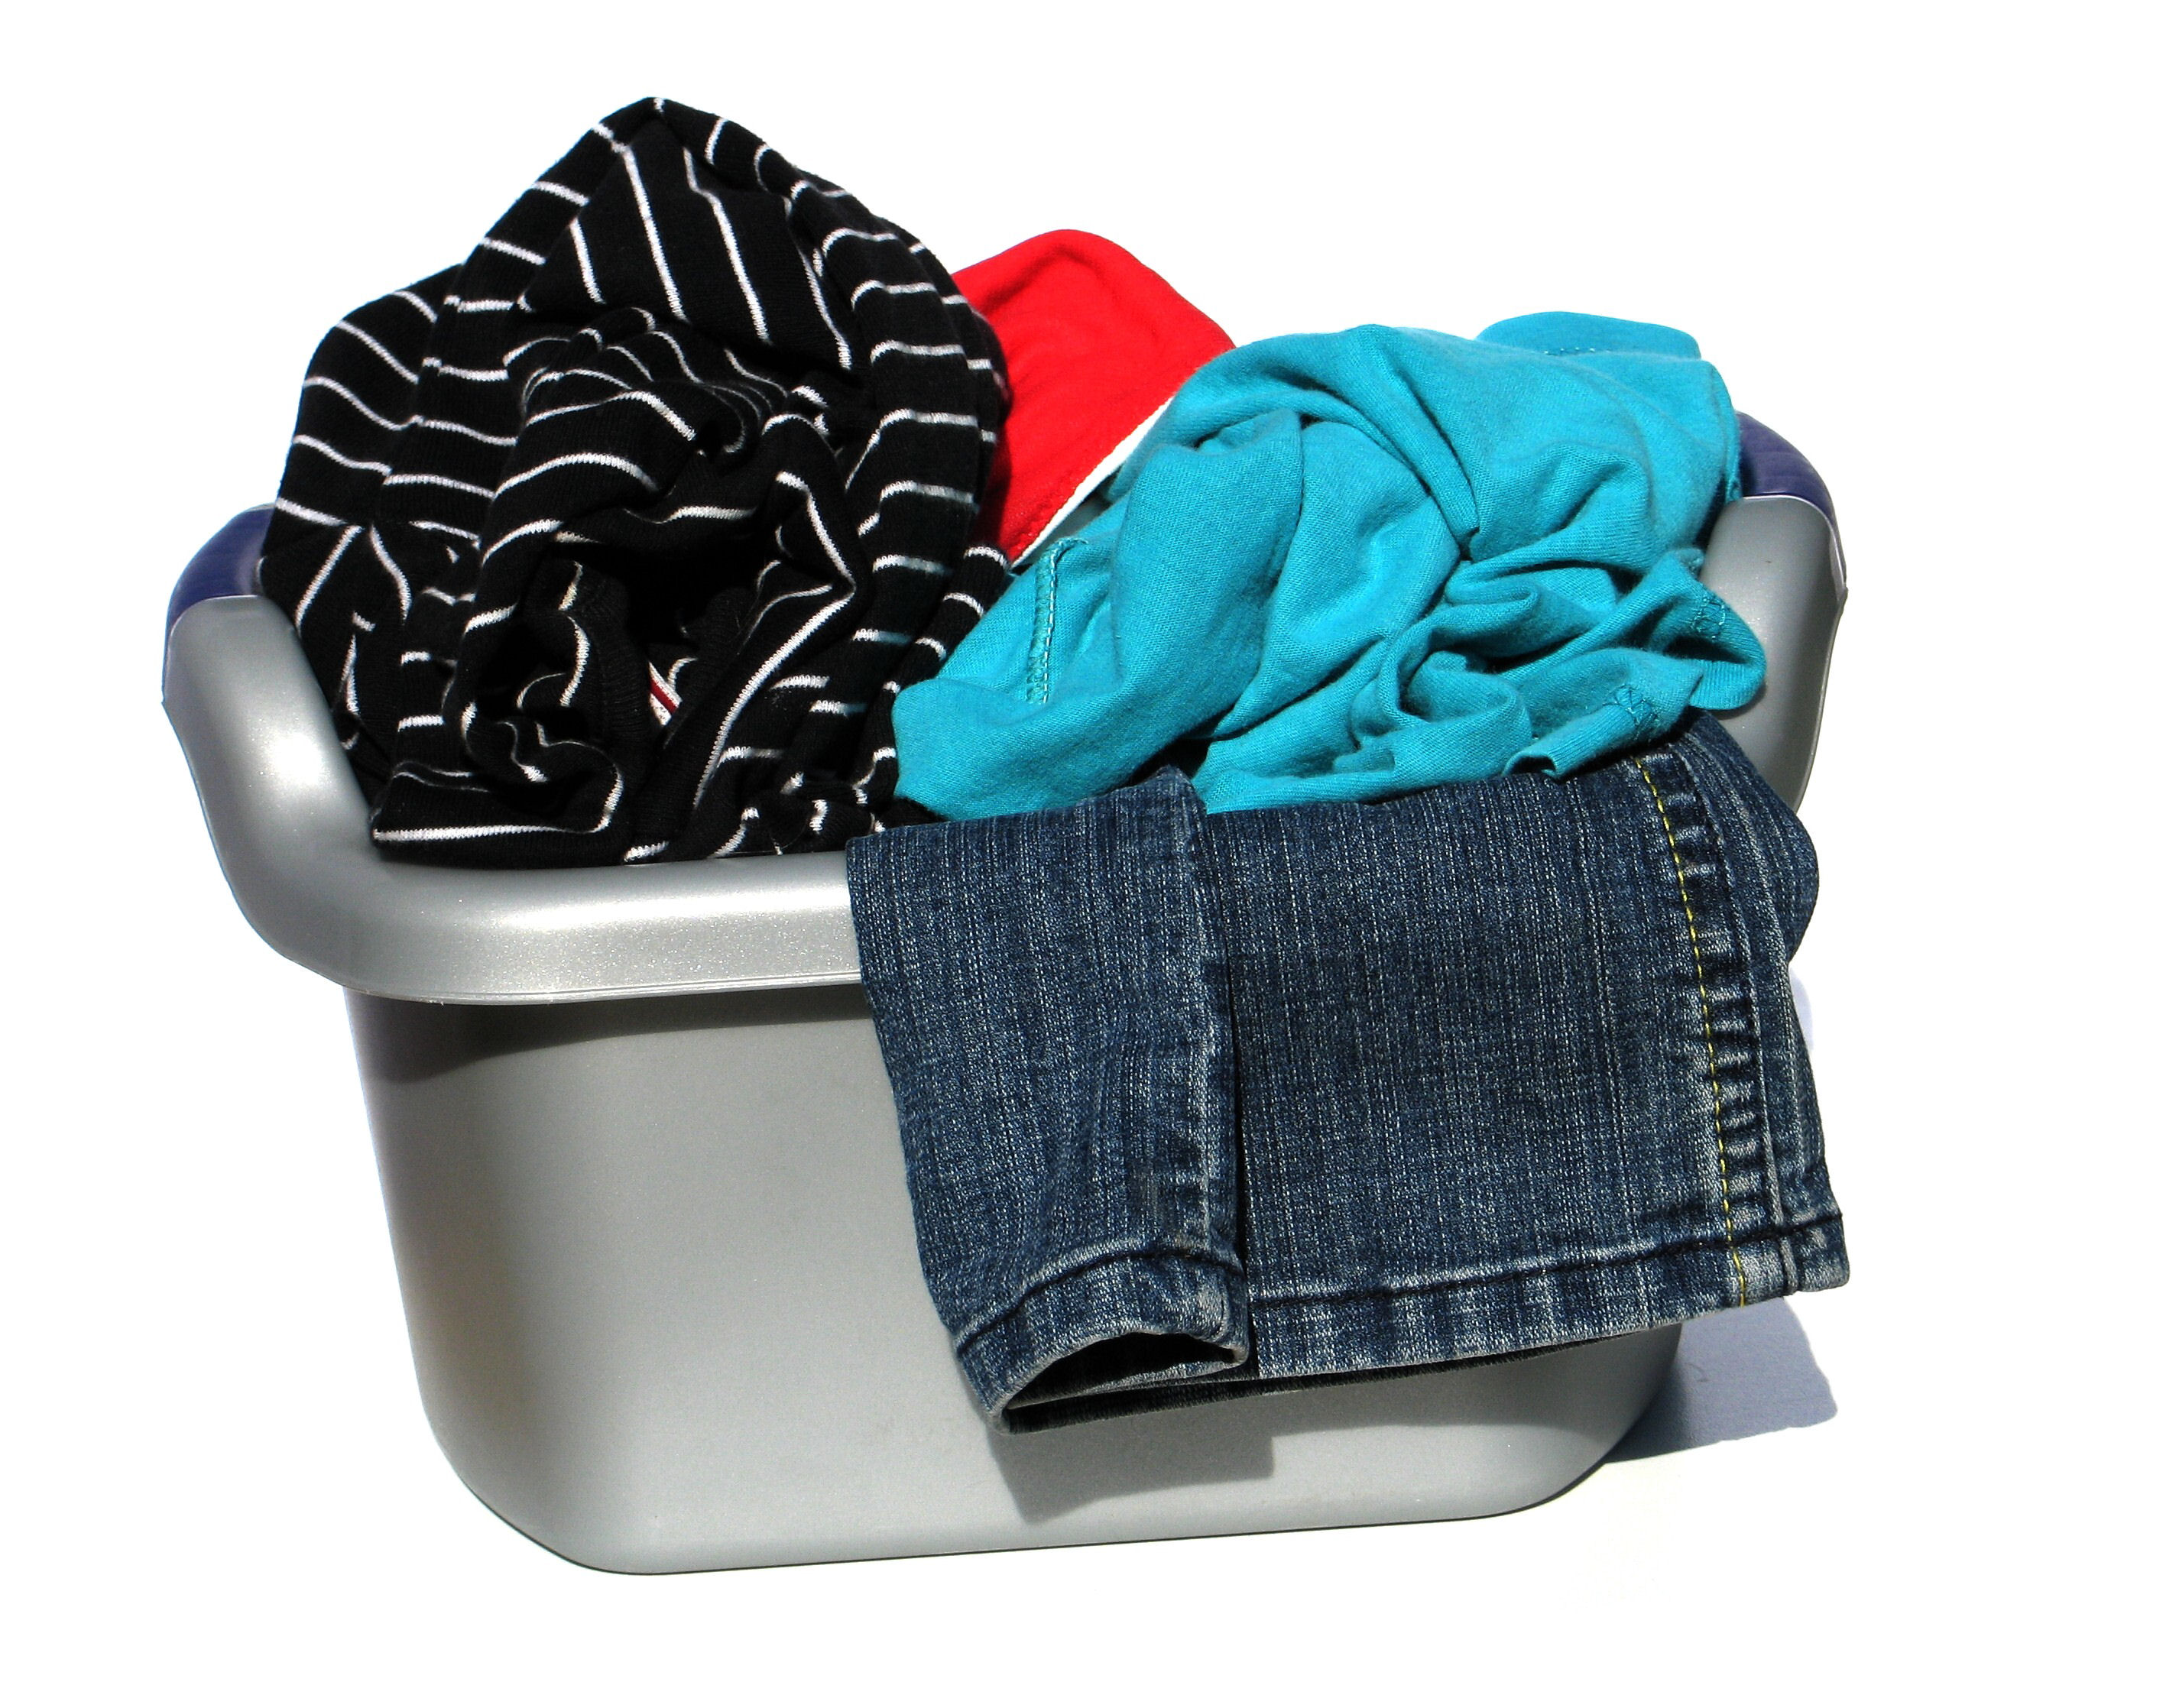 11 No-Brainer Ways to Make Doing Laundry Easier